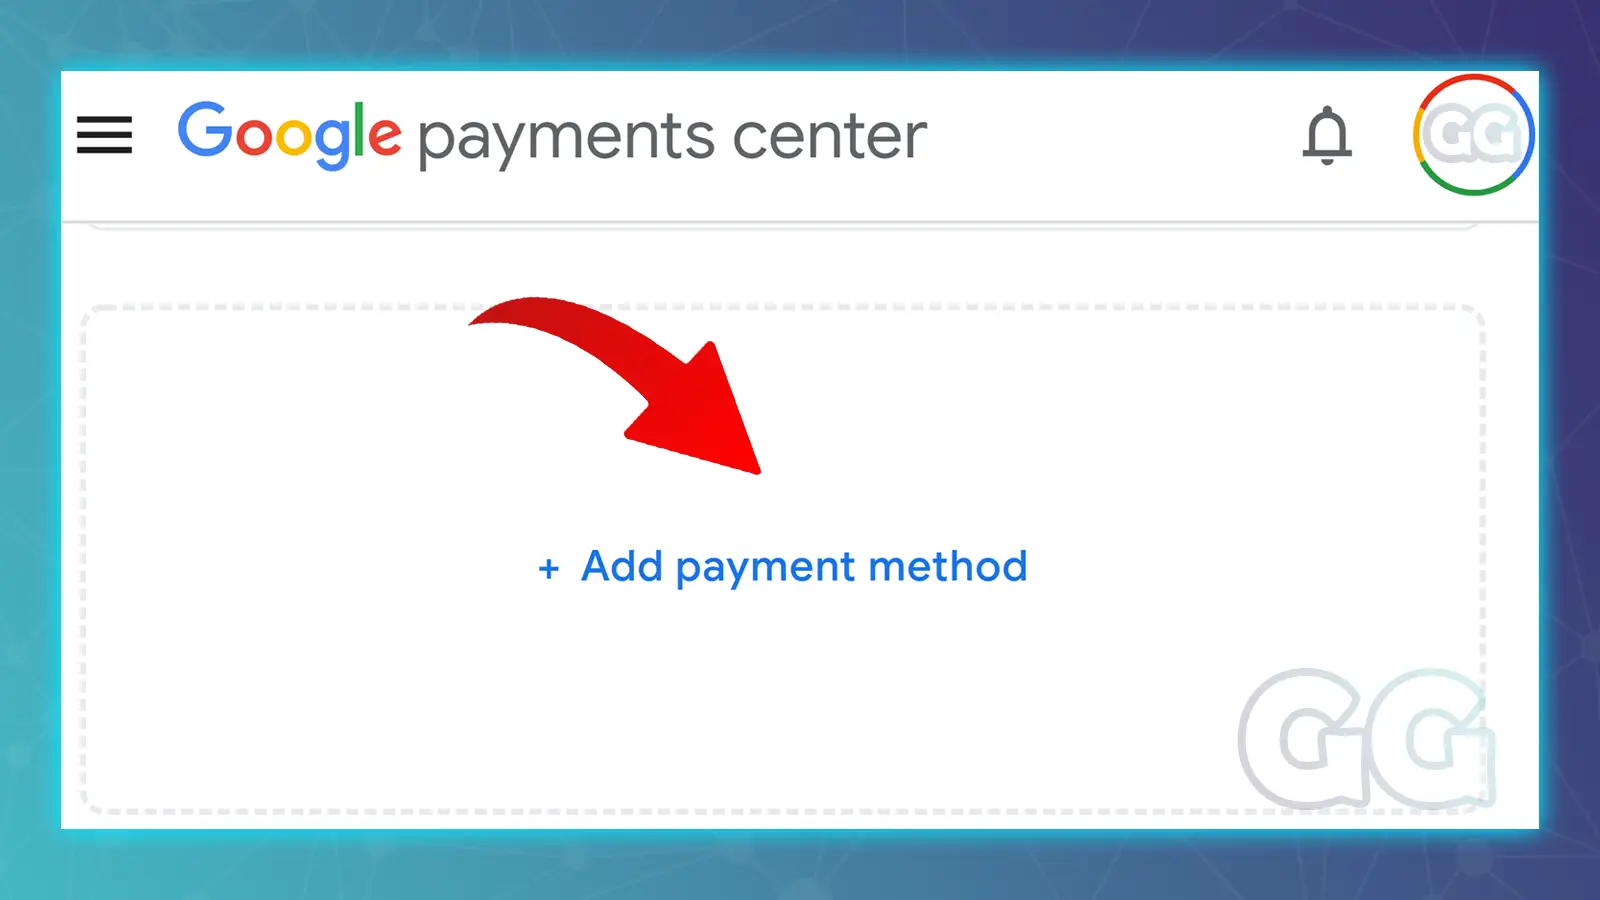 google payments center screen showing the add payment method button